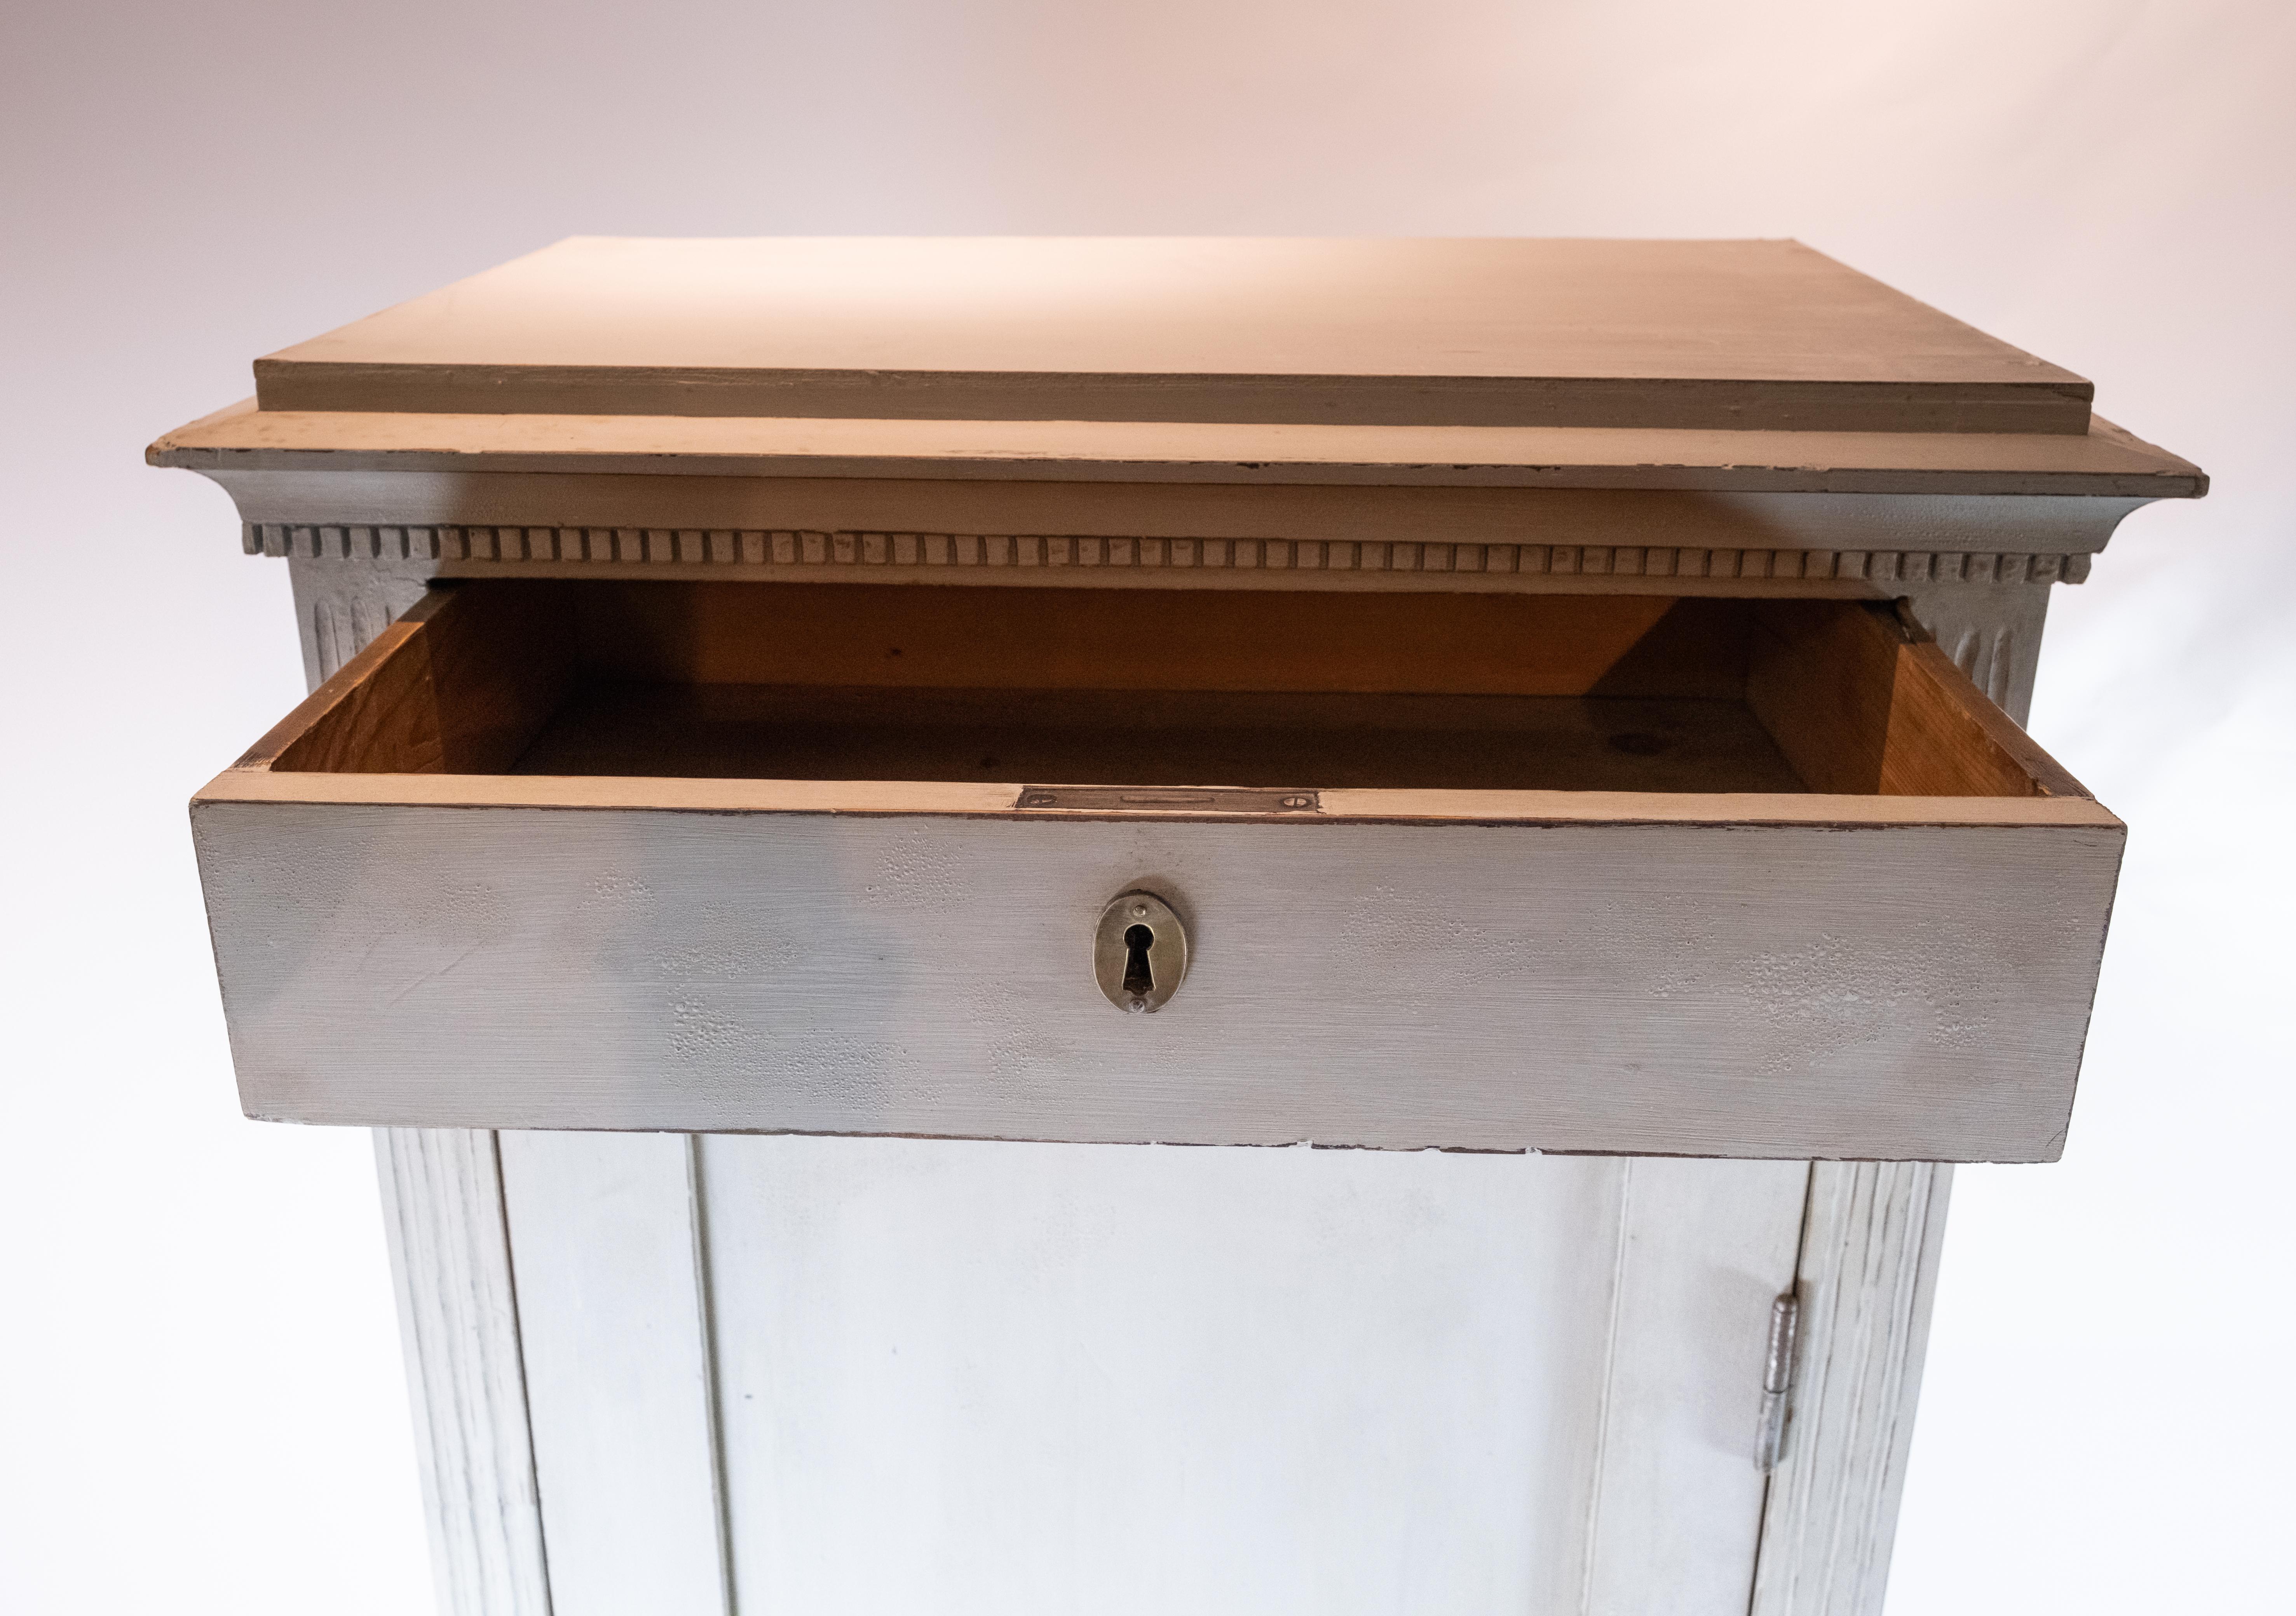 Grey Painted Gustavian Tall Cabinet, in Great Condition from the 1840s 8